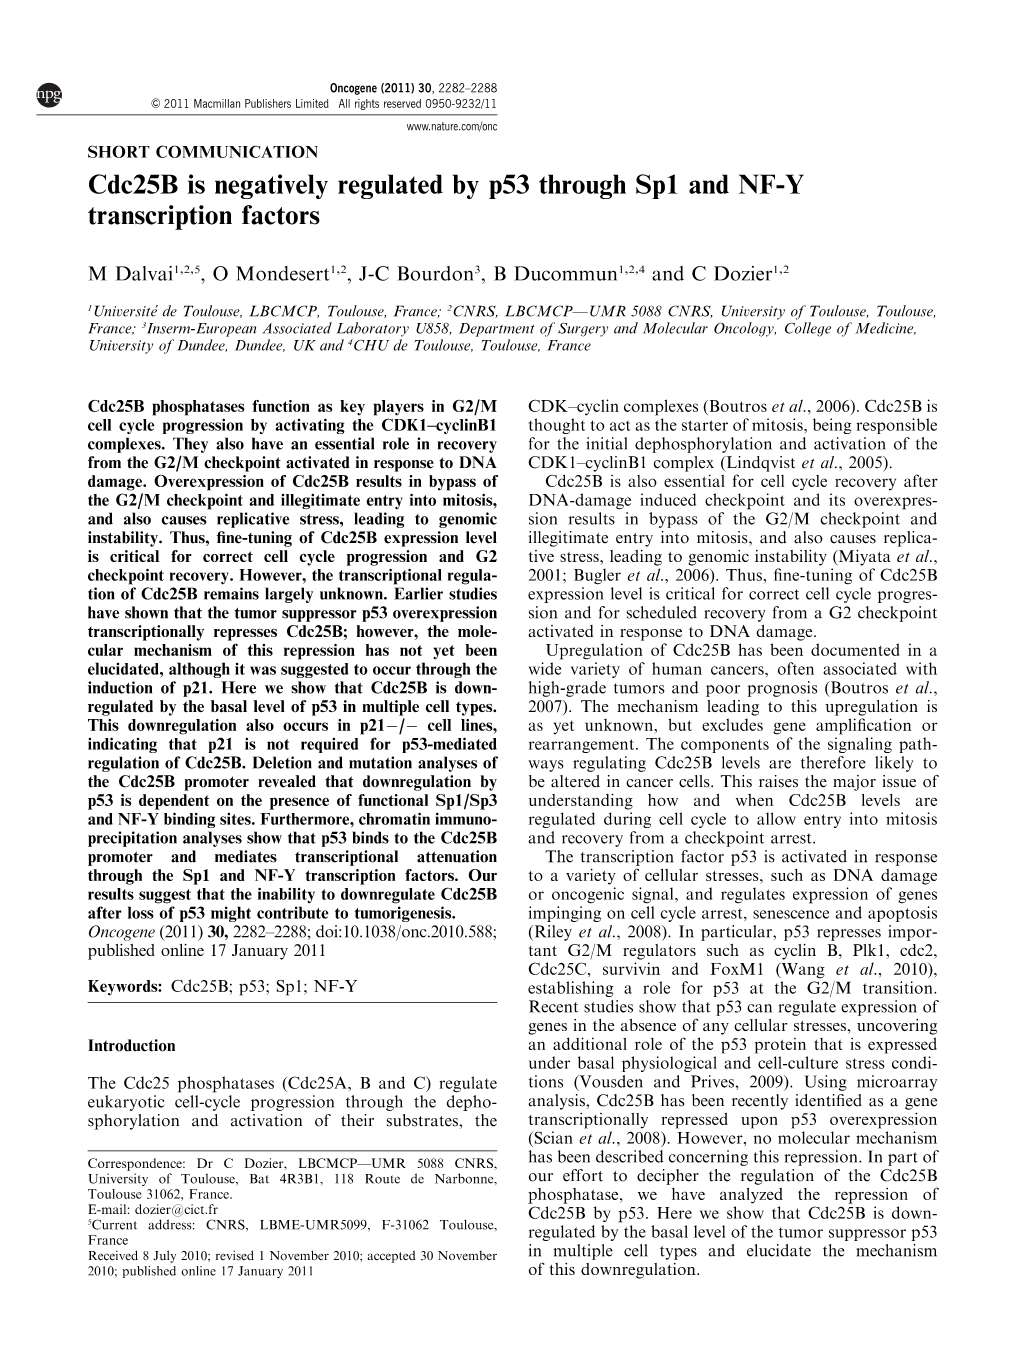 Cdc25b Is Negatively Regulated by P53 Through Sp1 and NF-Y Transcription Factors